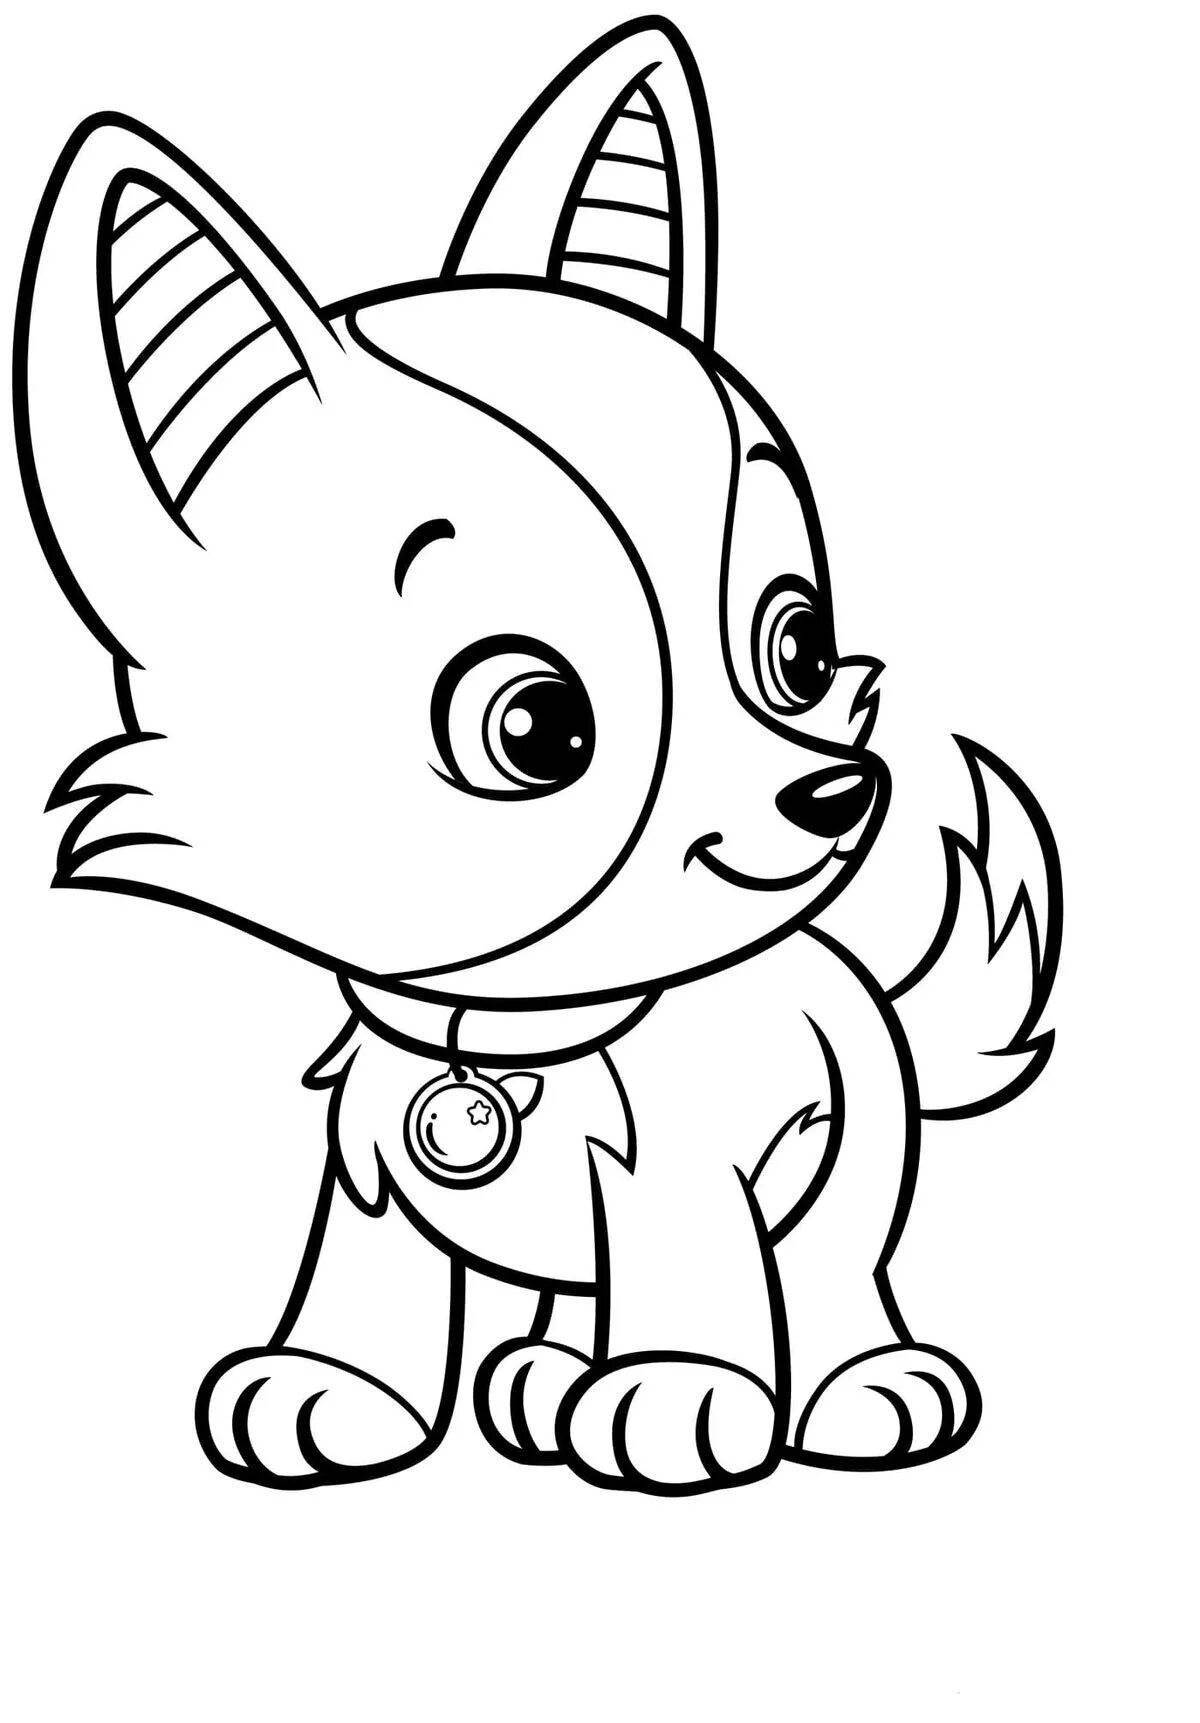 Puppy coloring pages for girls